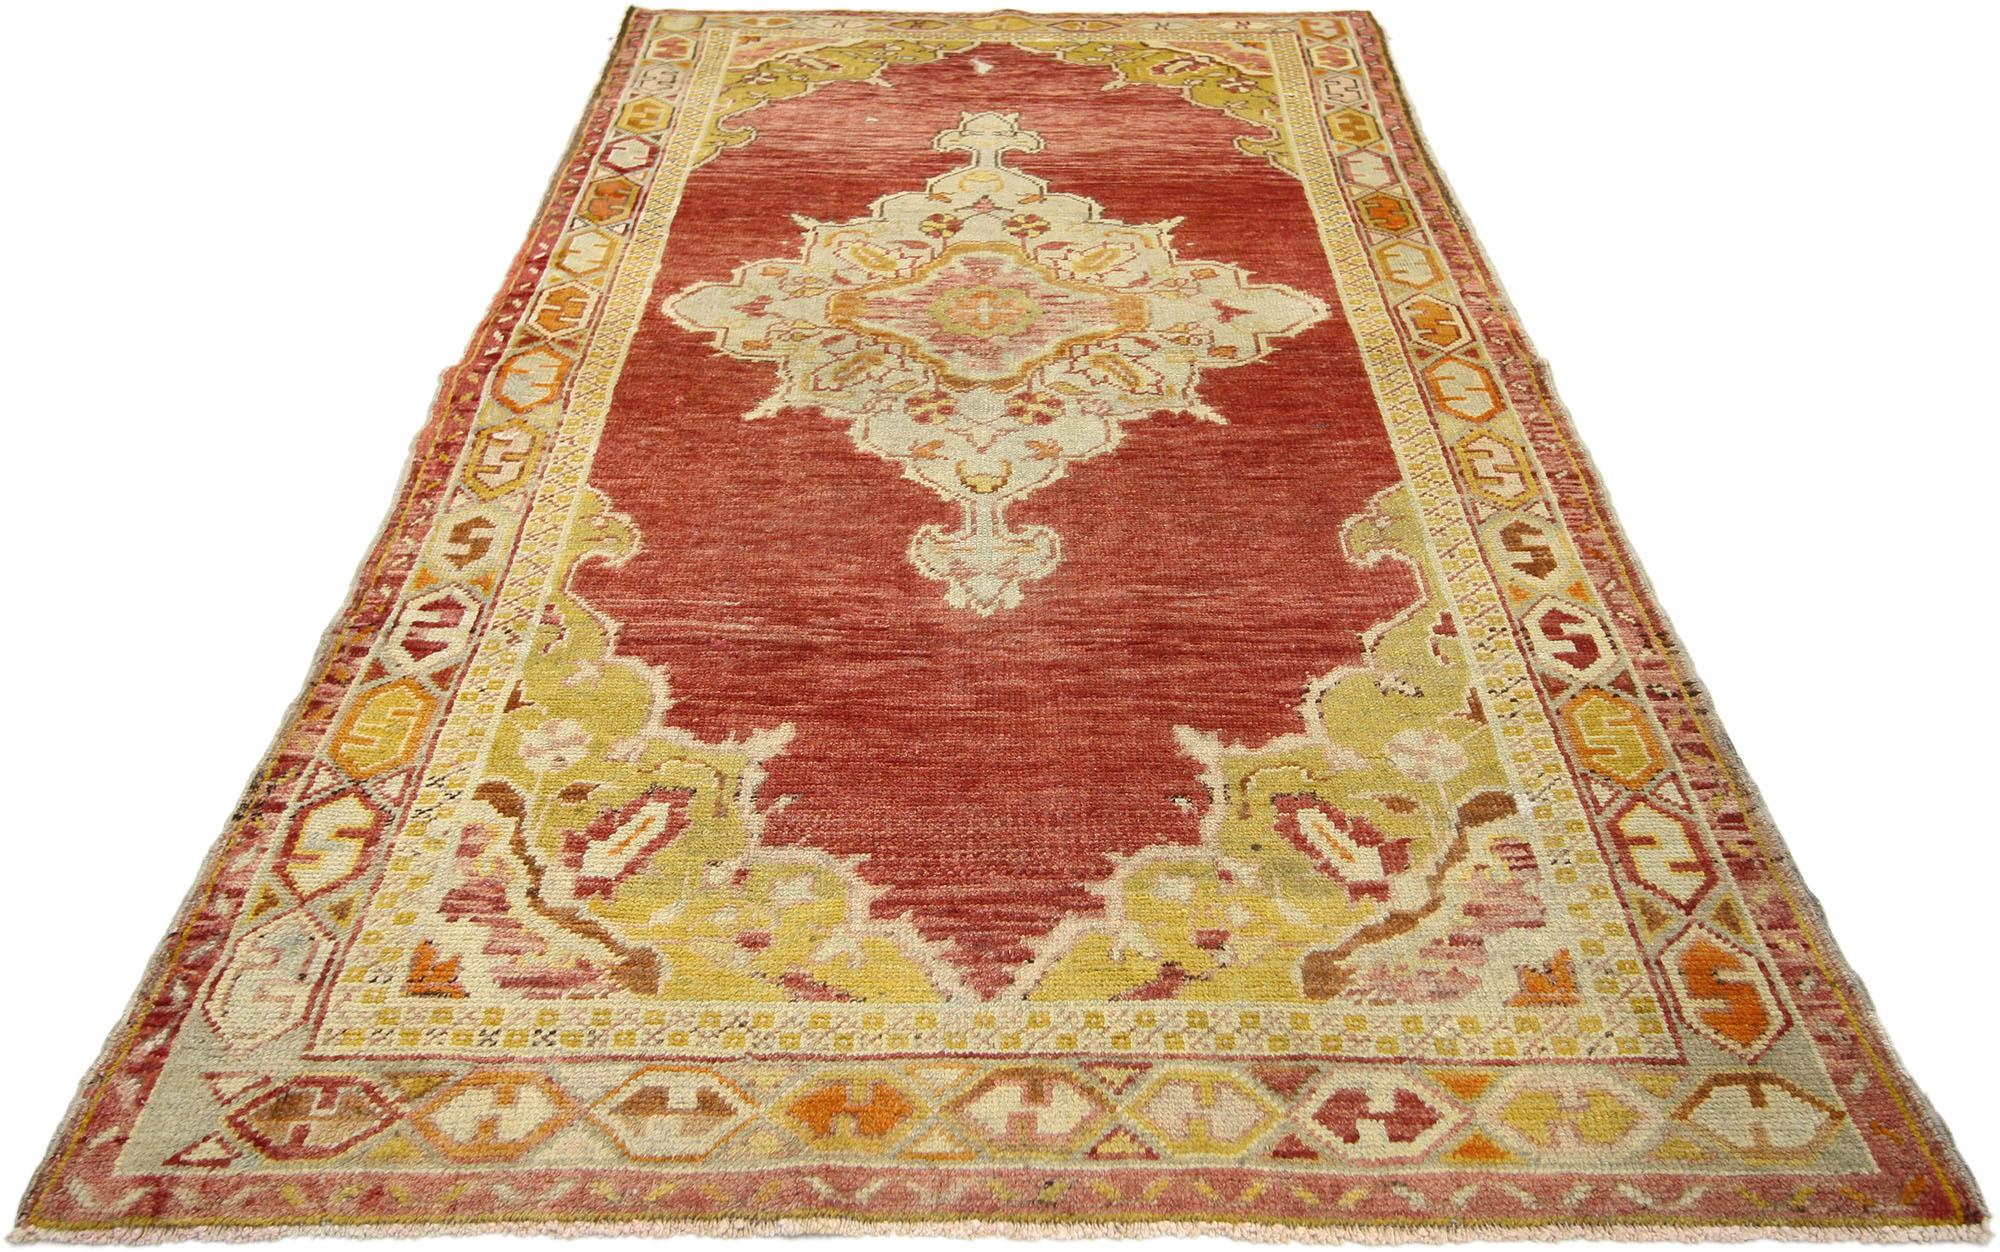 Vintage Turkish Oushak Rug with Traditional Rustic Style In Good Condition For Sale In Dallas, TX